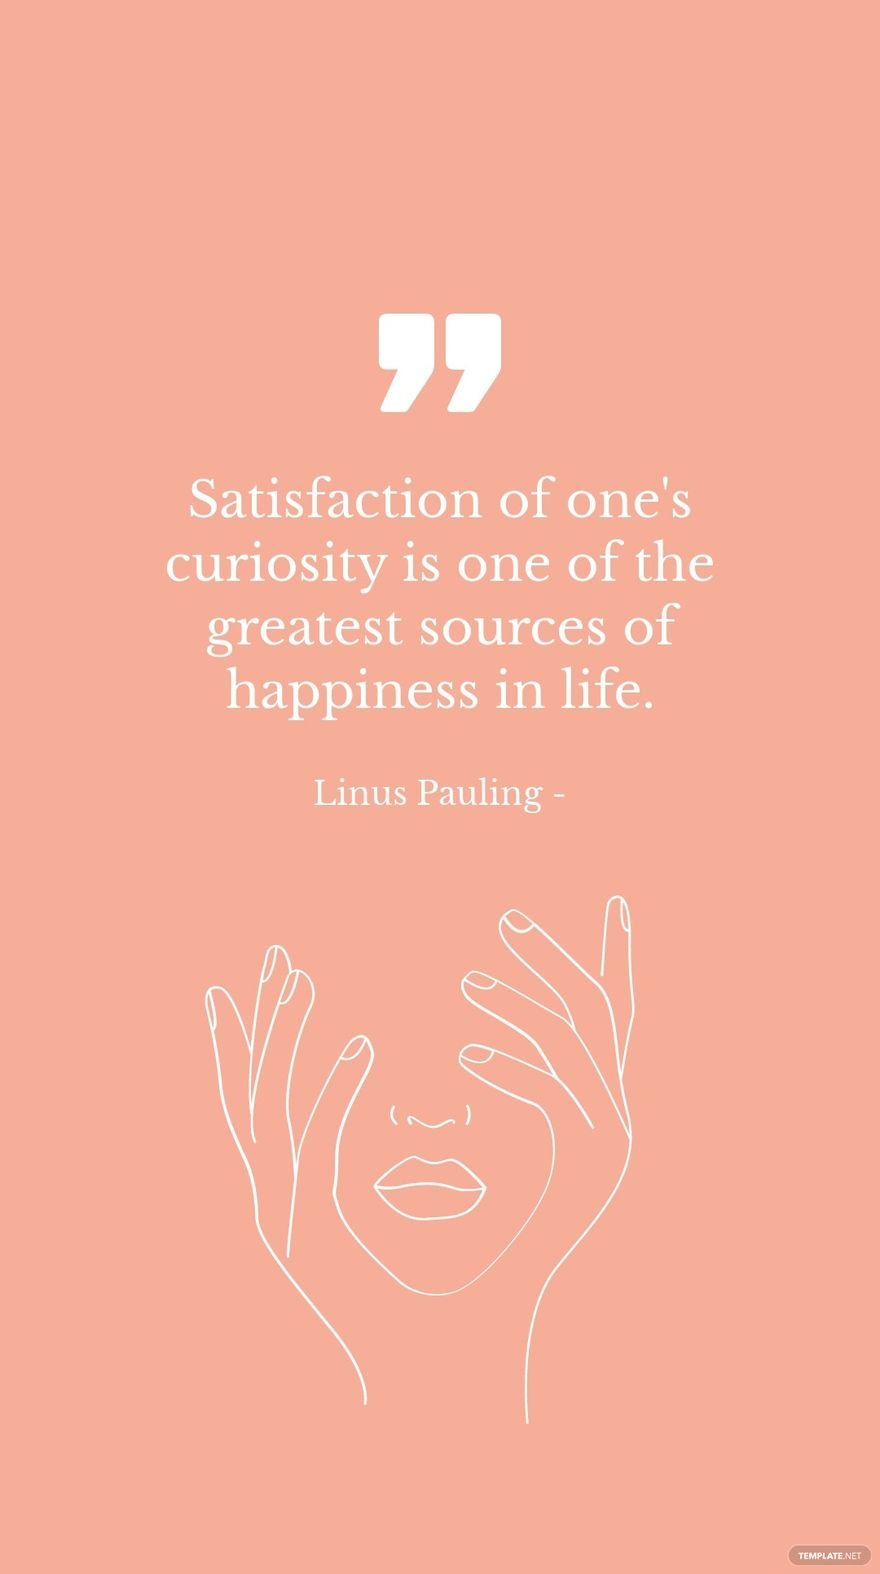 Linus Pauling - Satisfaction of one's curiosity is one of the greatest sources of happiness in life.